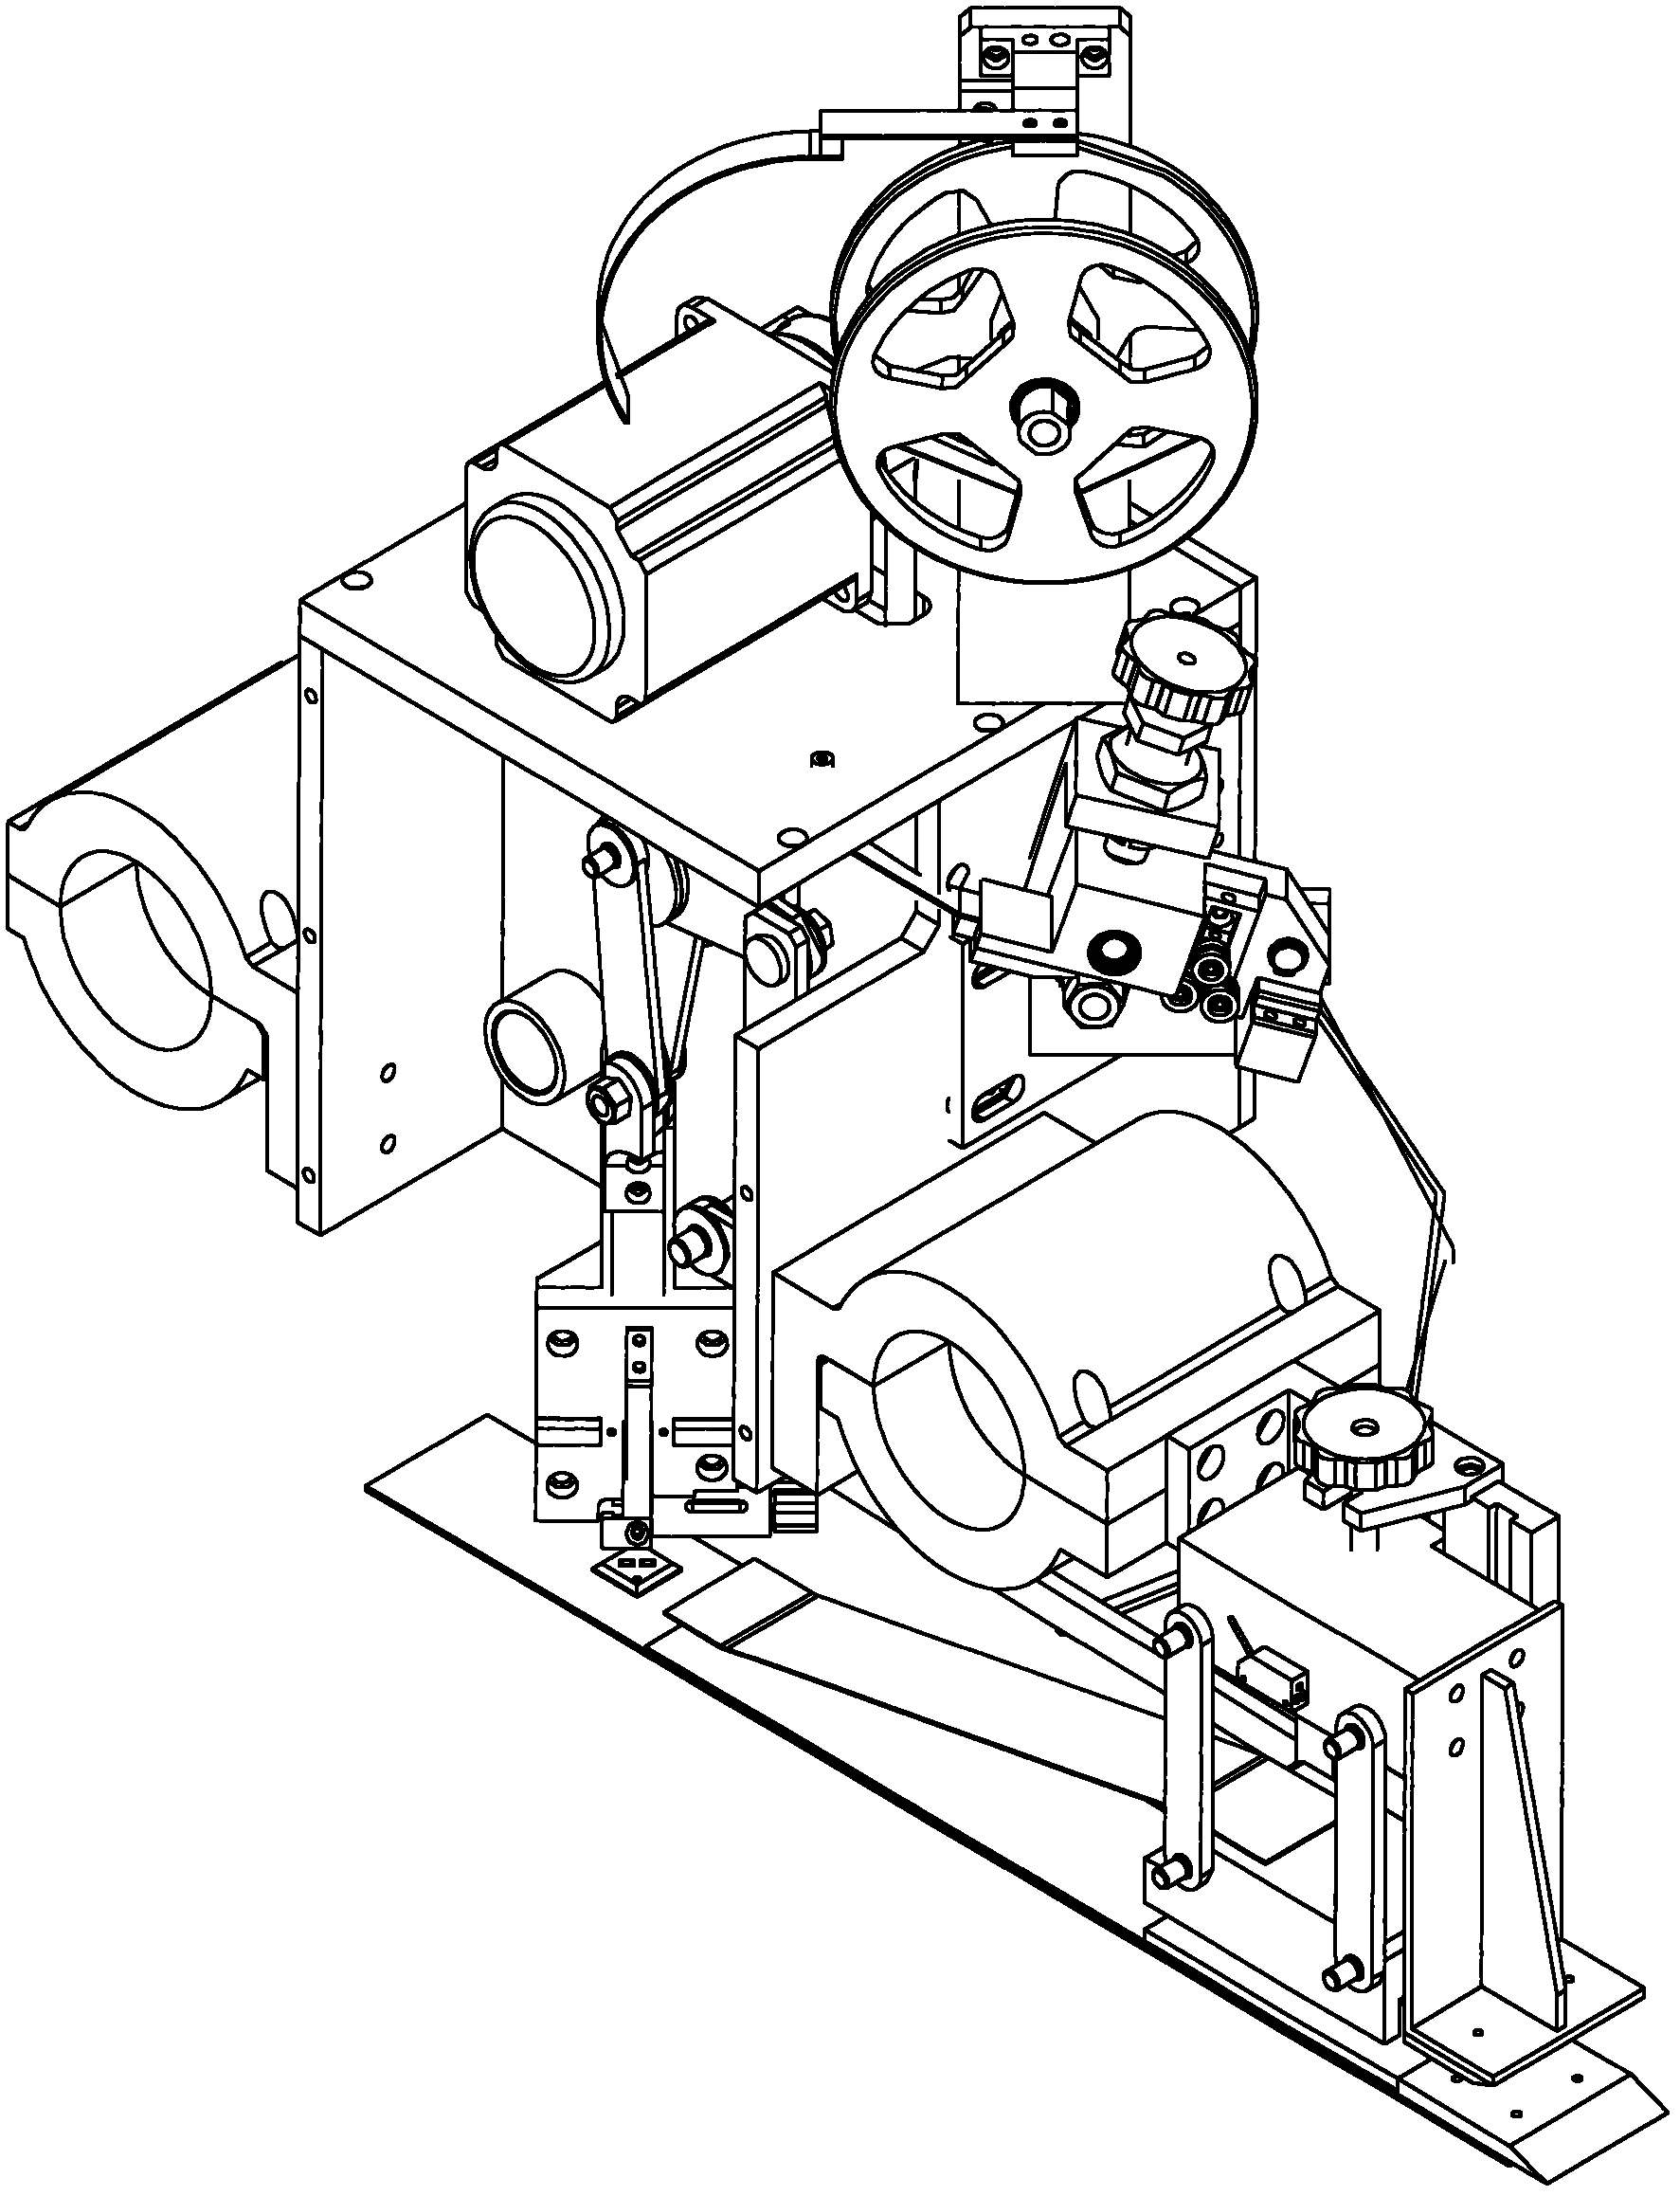 Nailing machine containing swinging type continuous nailing head